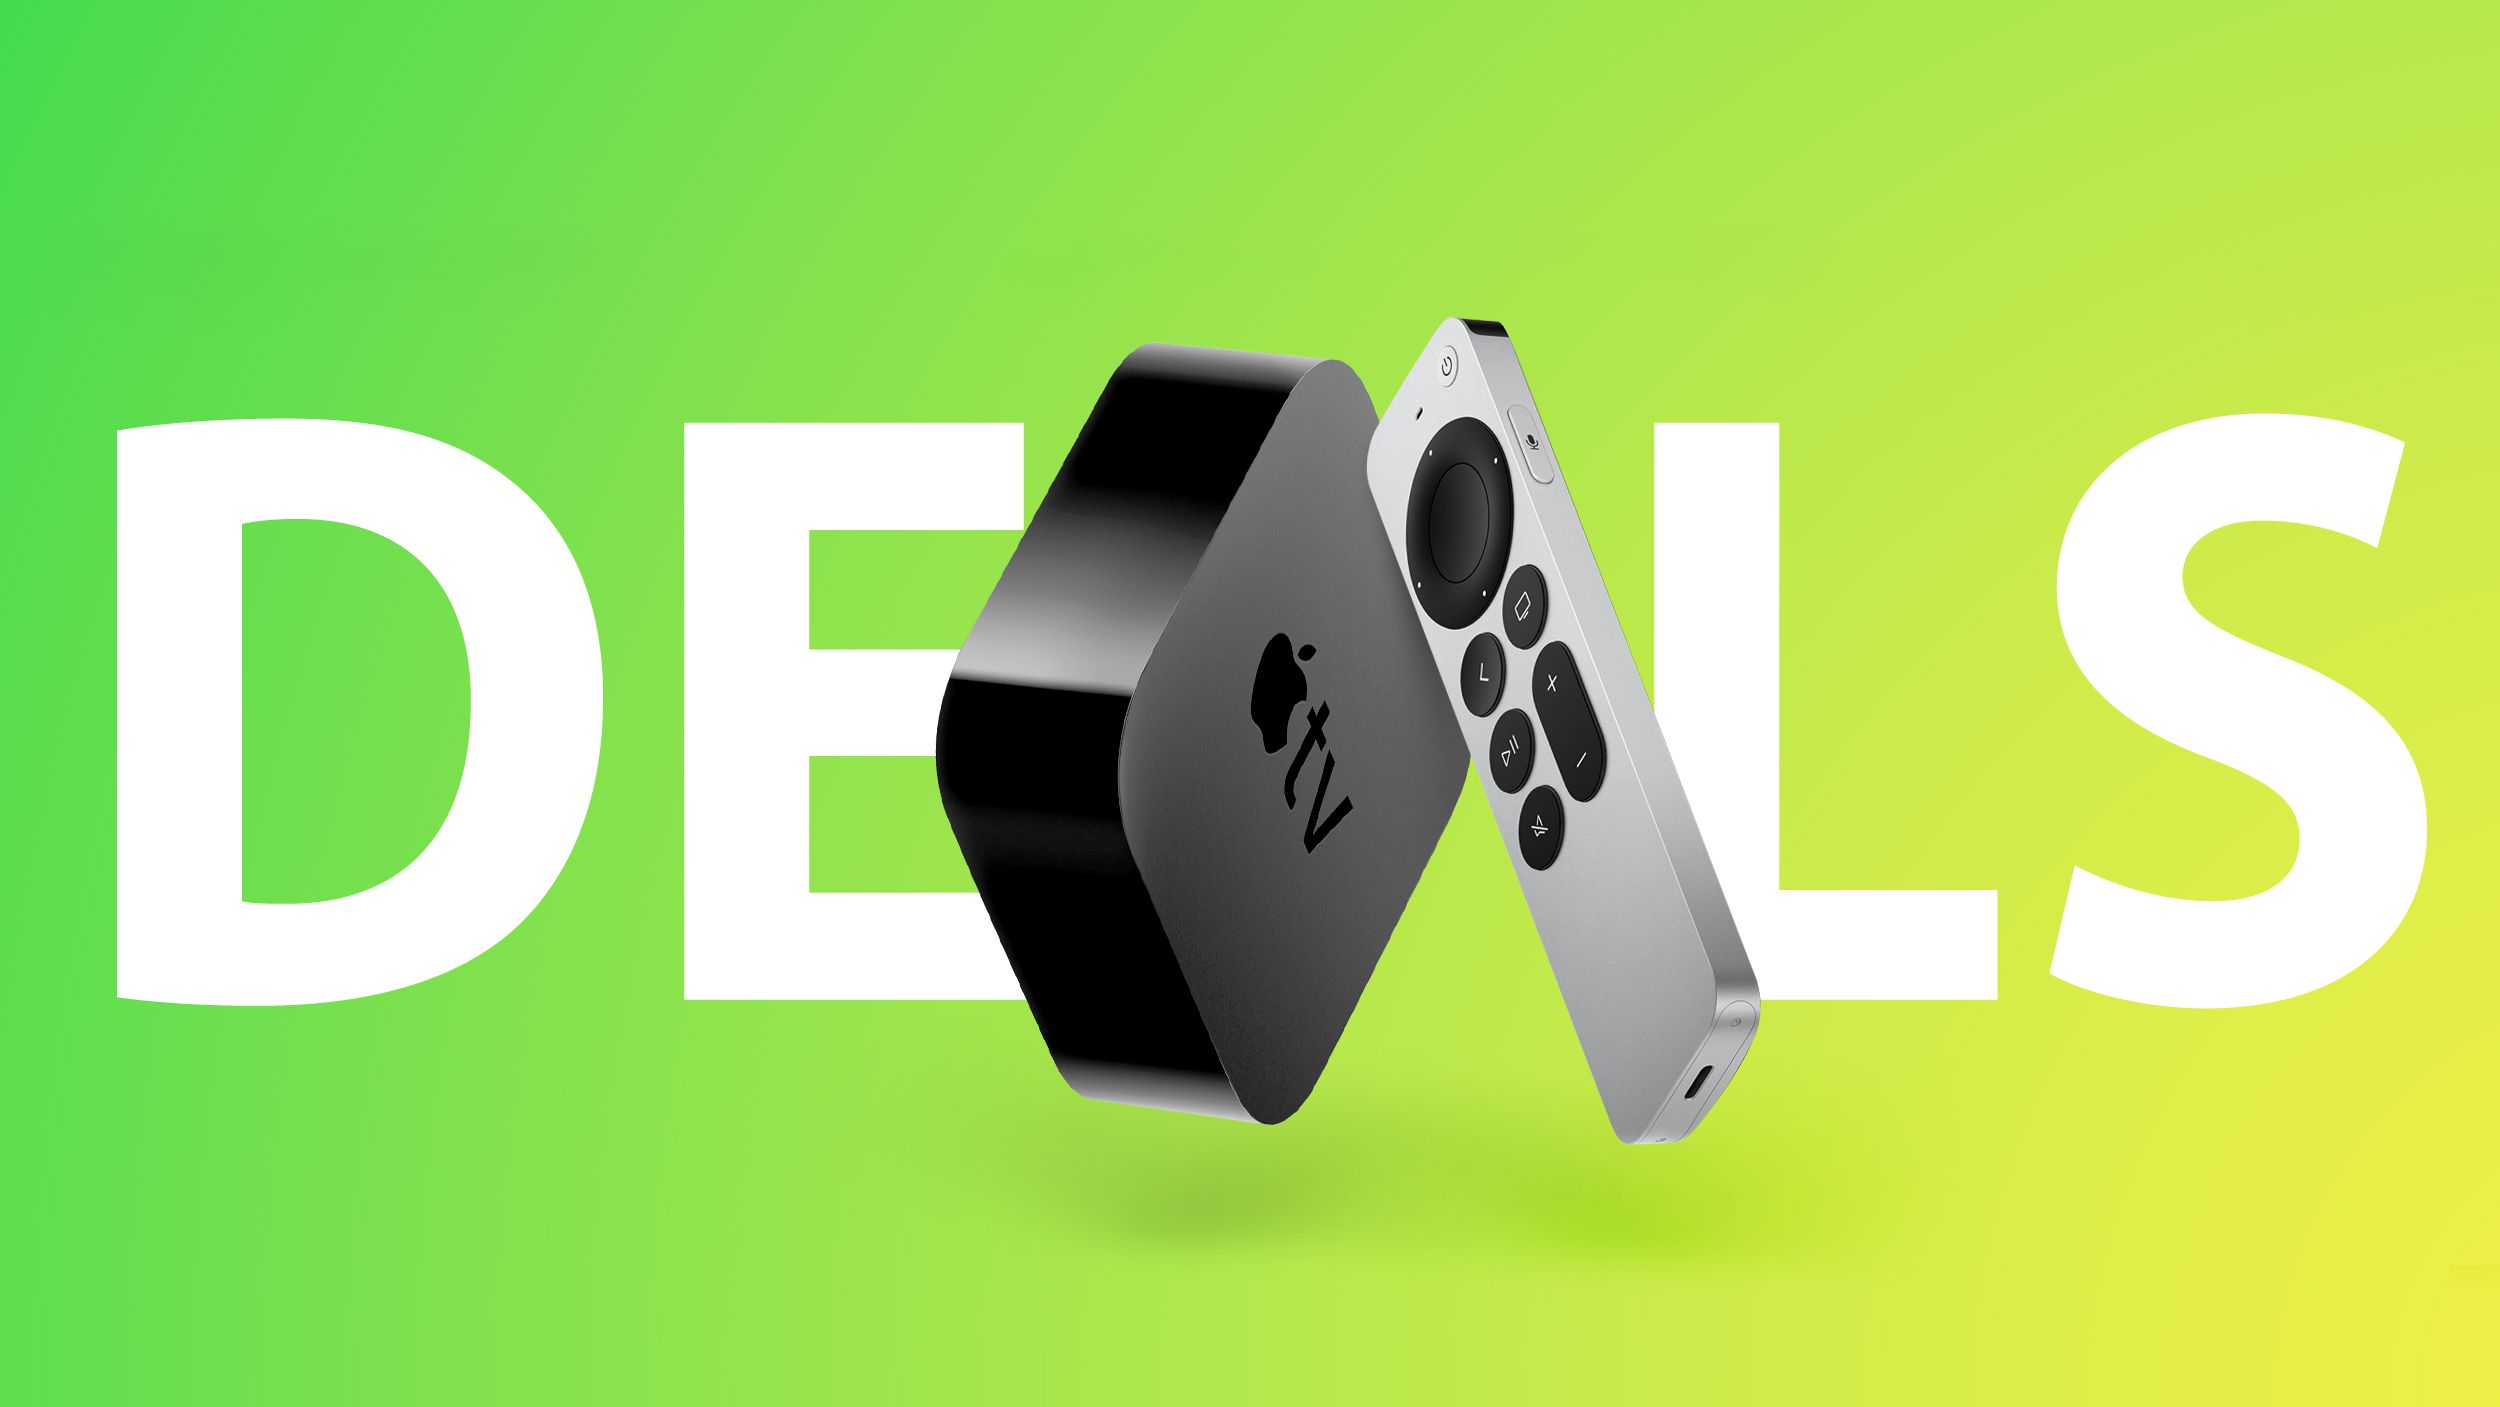 Deals: Apple TV 4K Available for Lowest-Ever Price of $149.99 on Amazon - macrumors.com